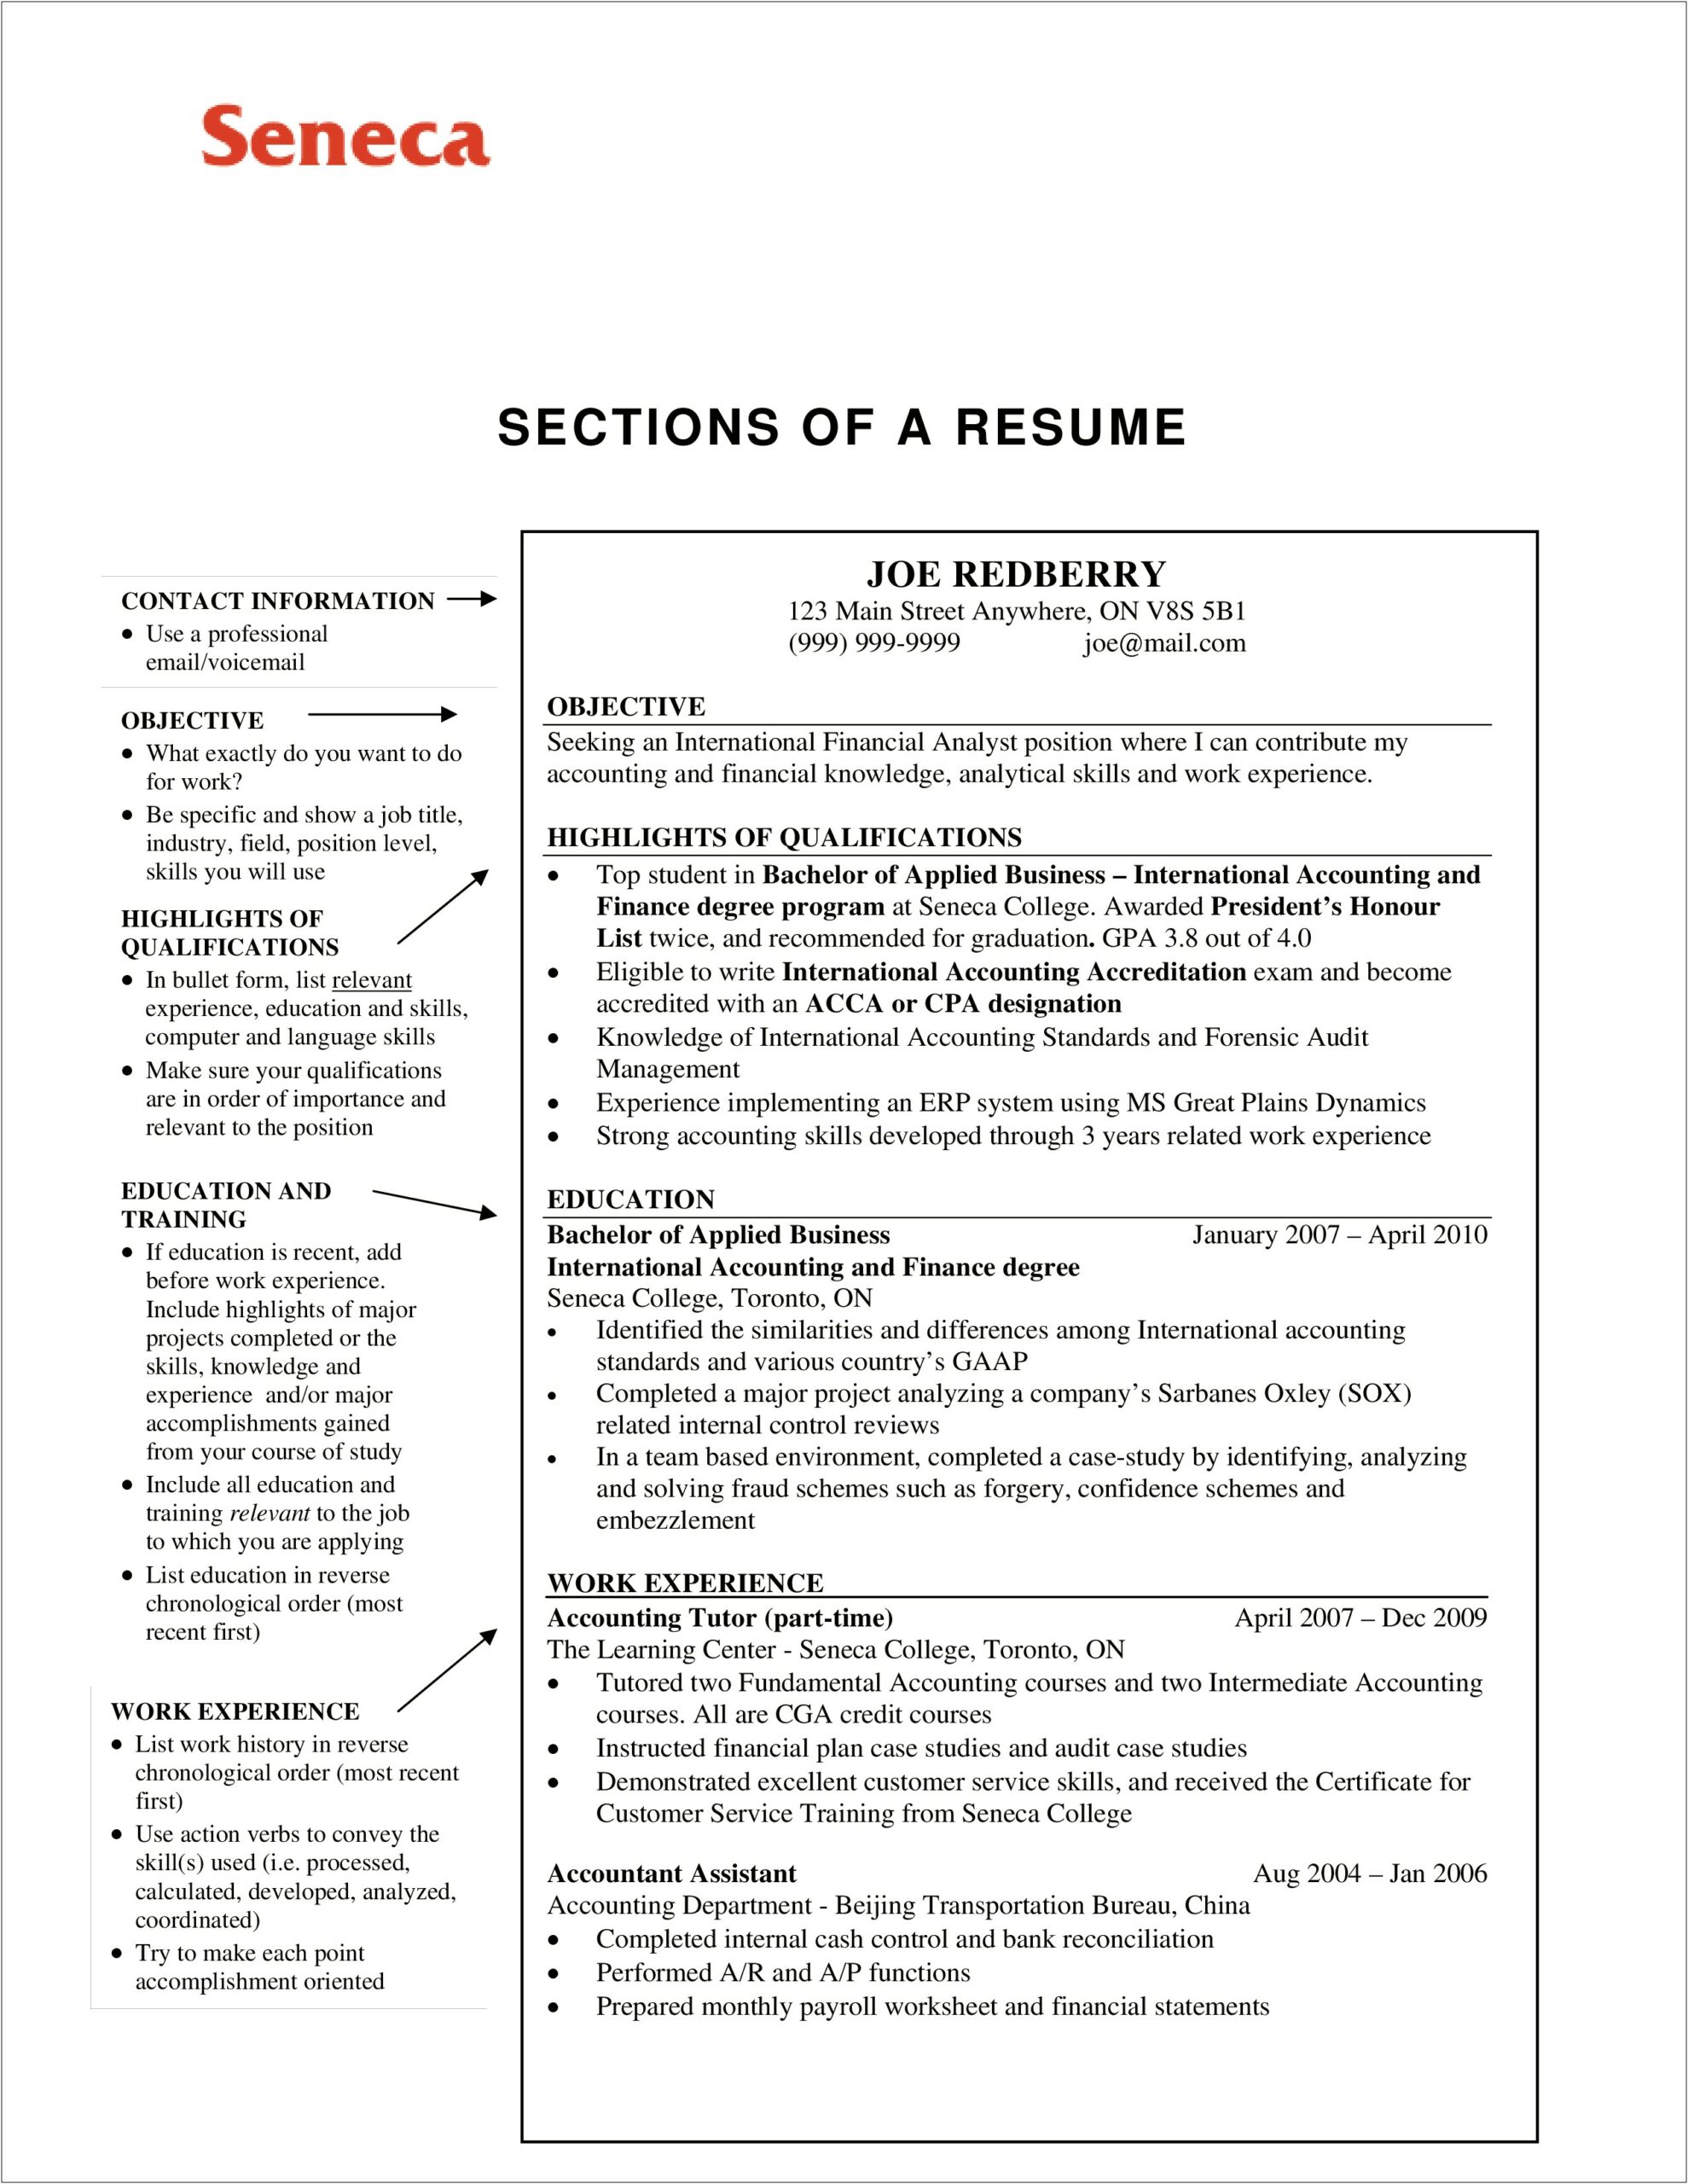 Resume Work Experience Or Relevant Experience